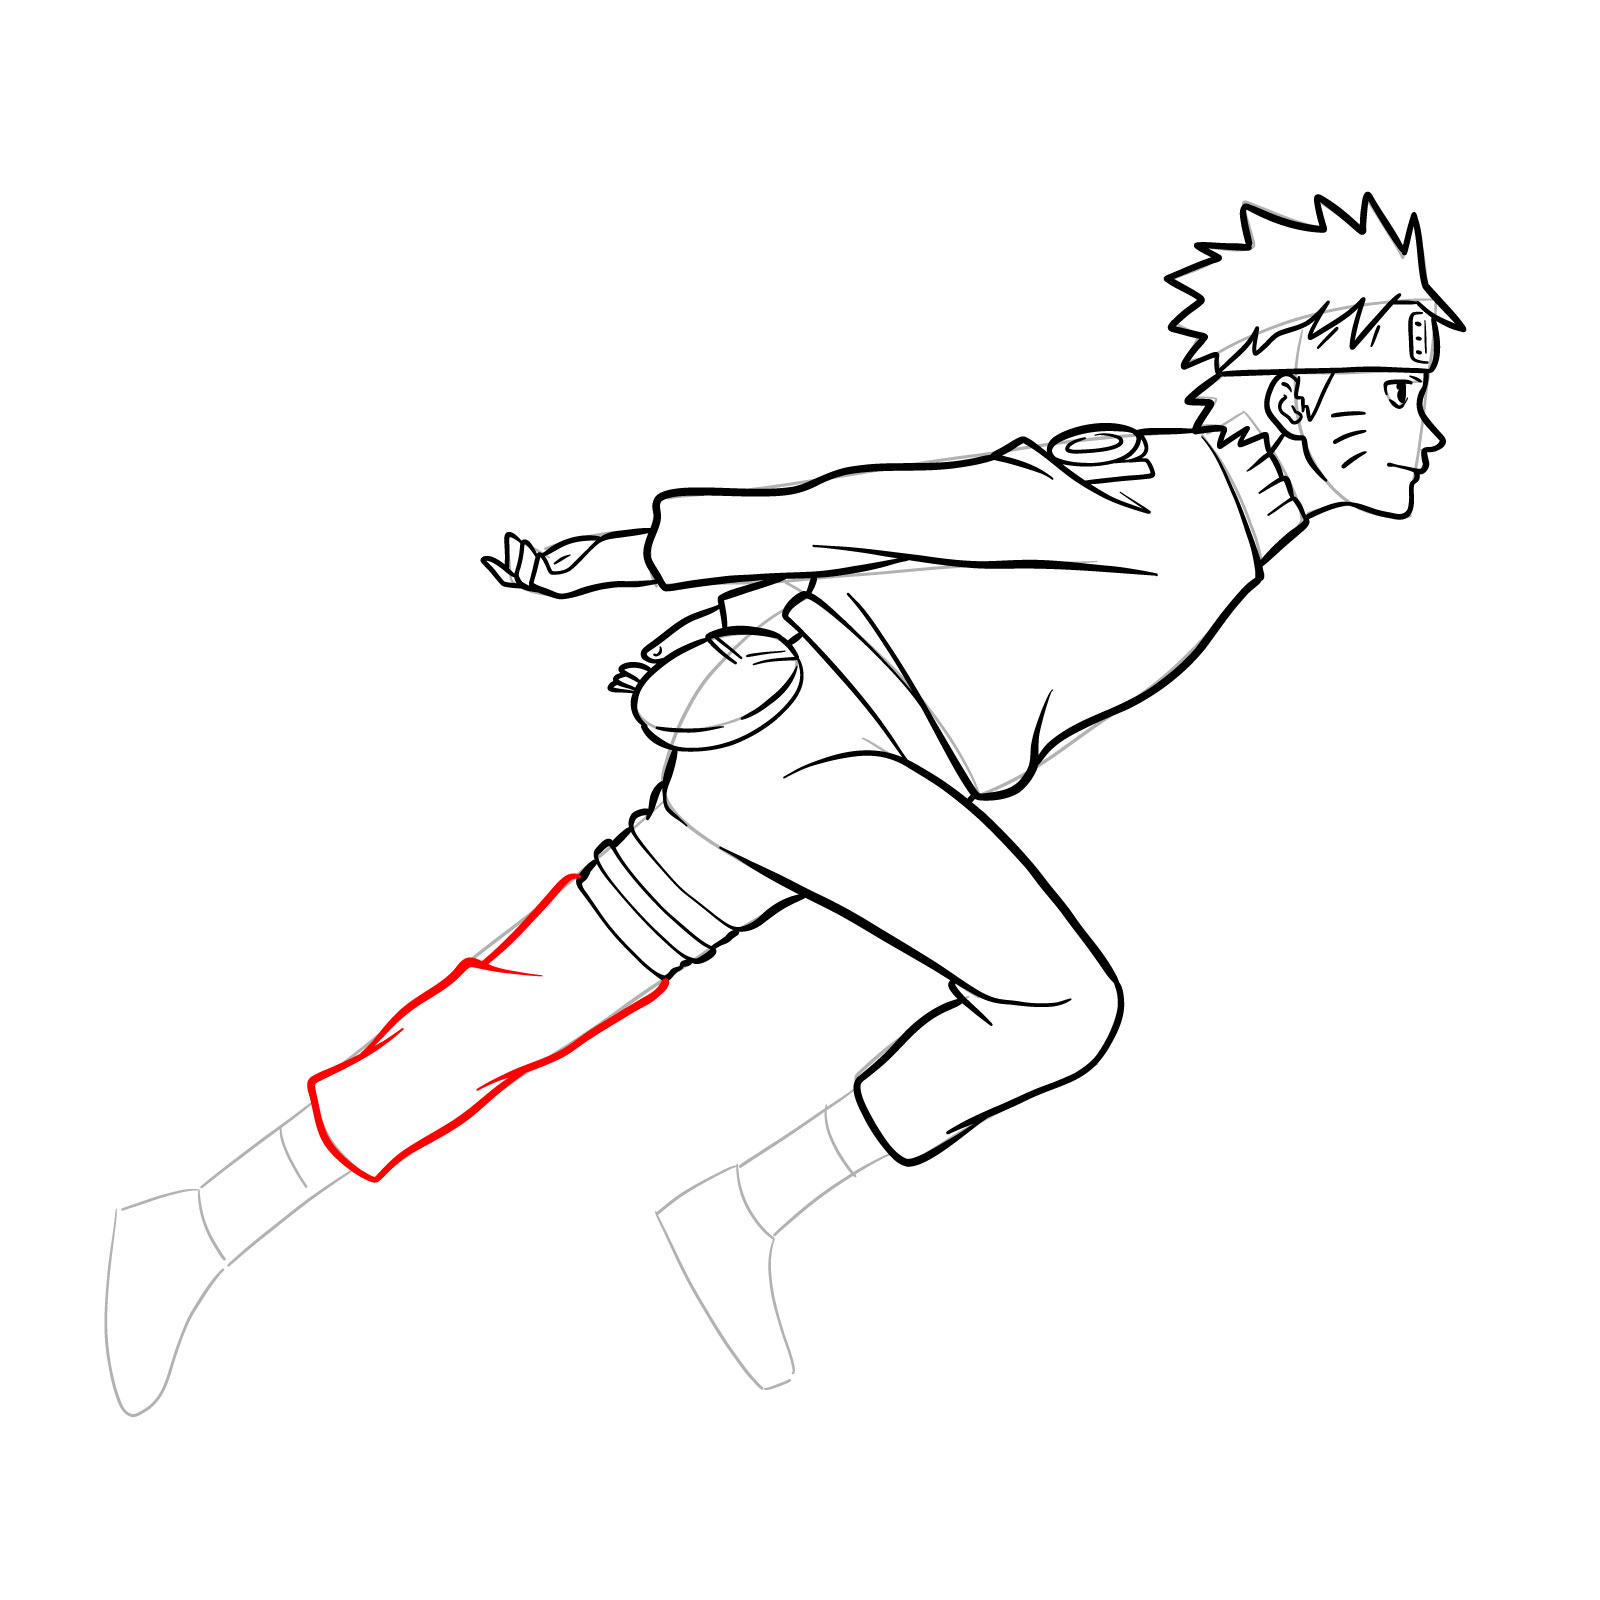 How to draw Naruto running - step 31